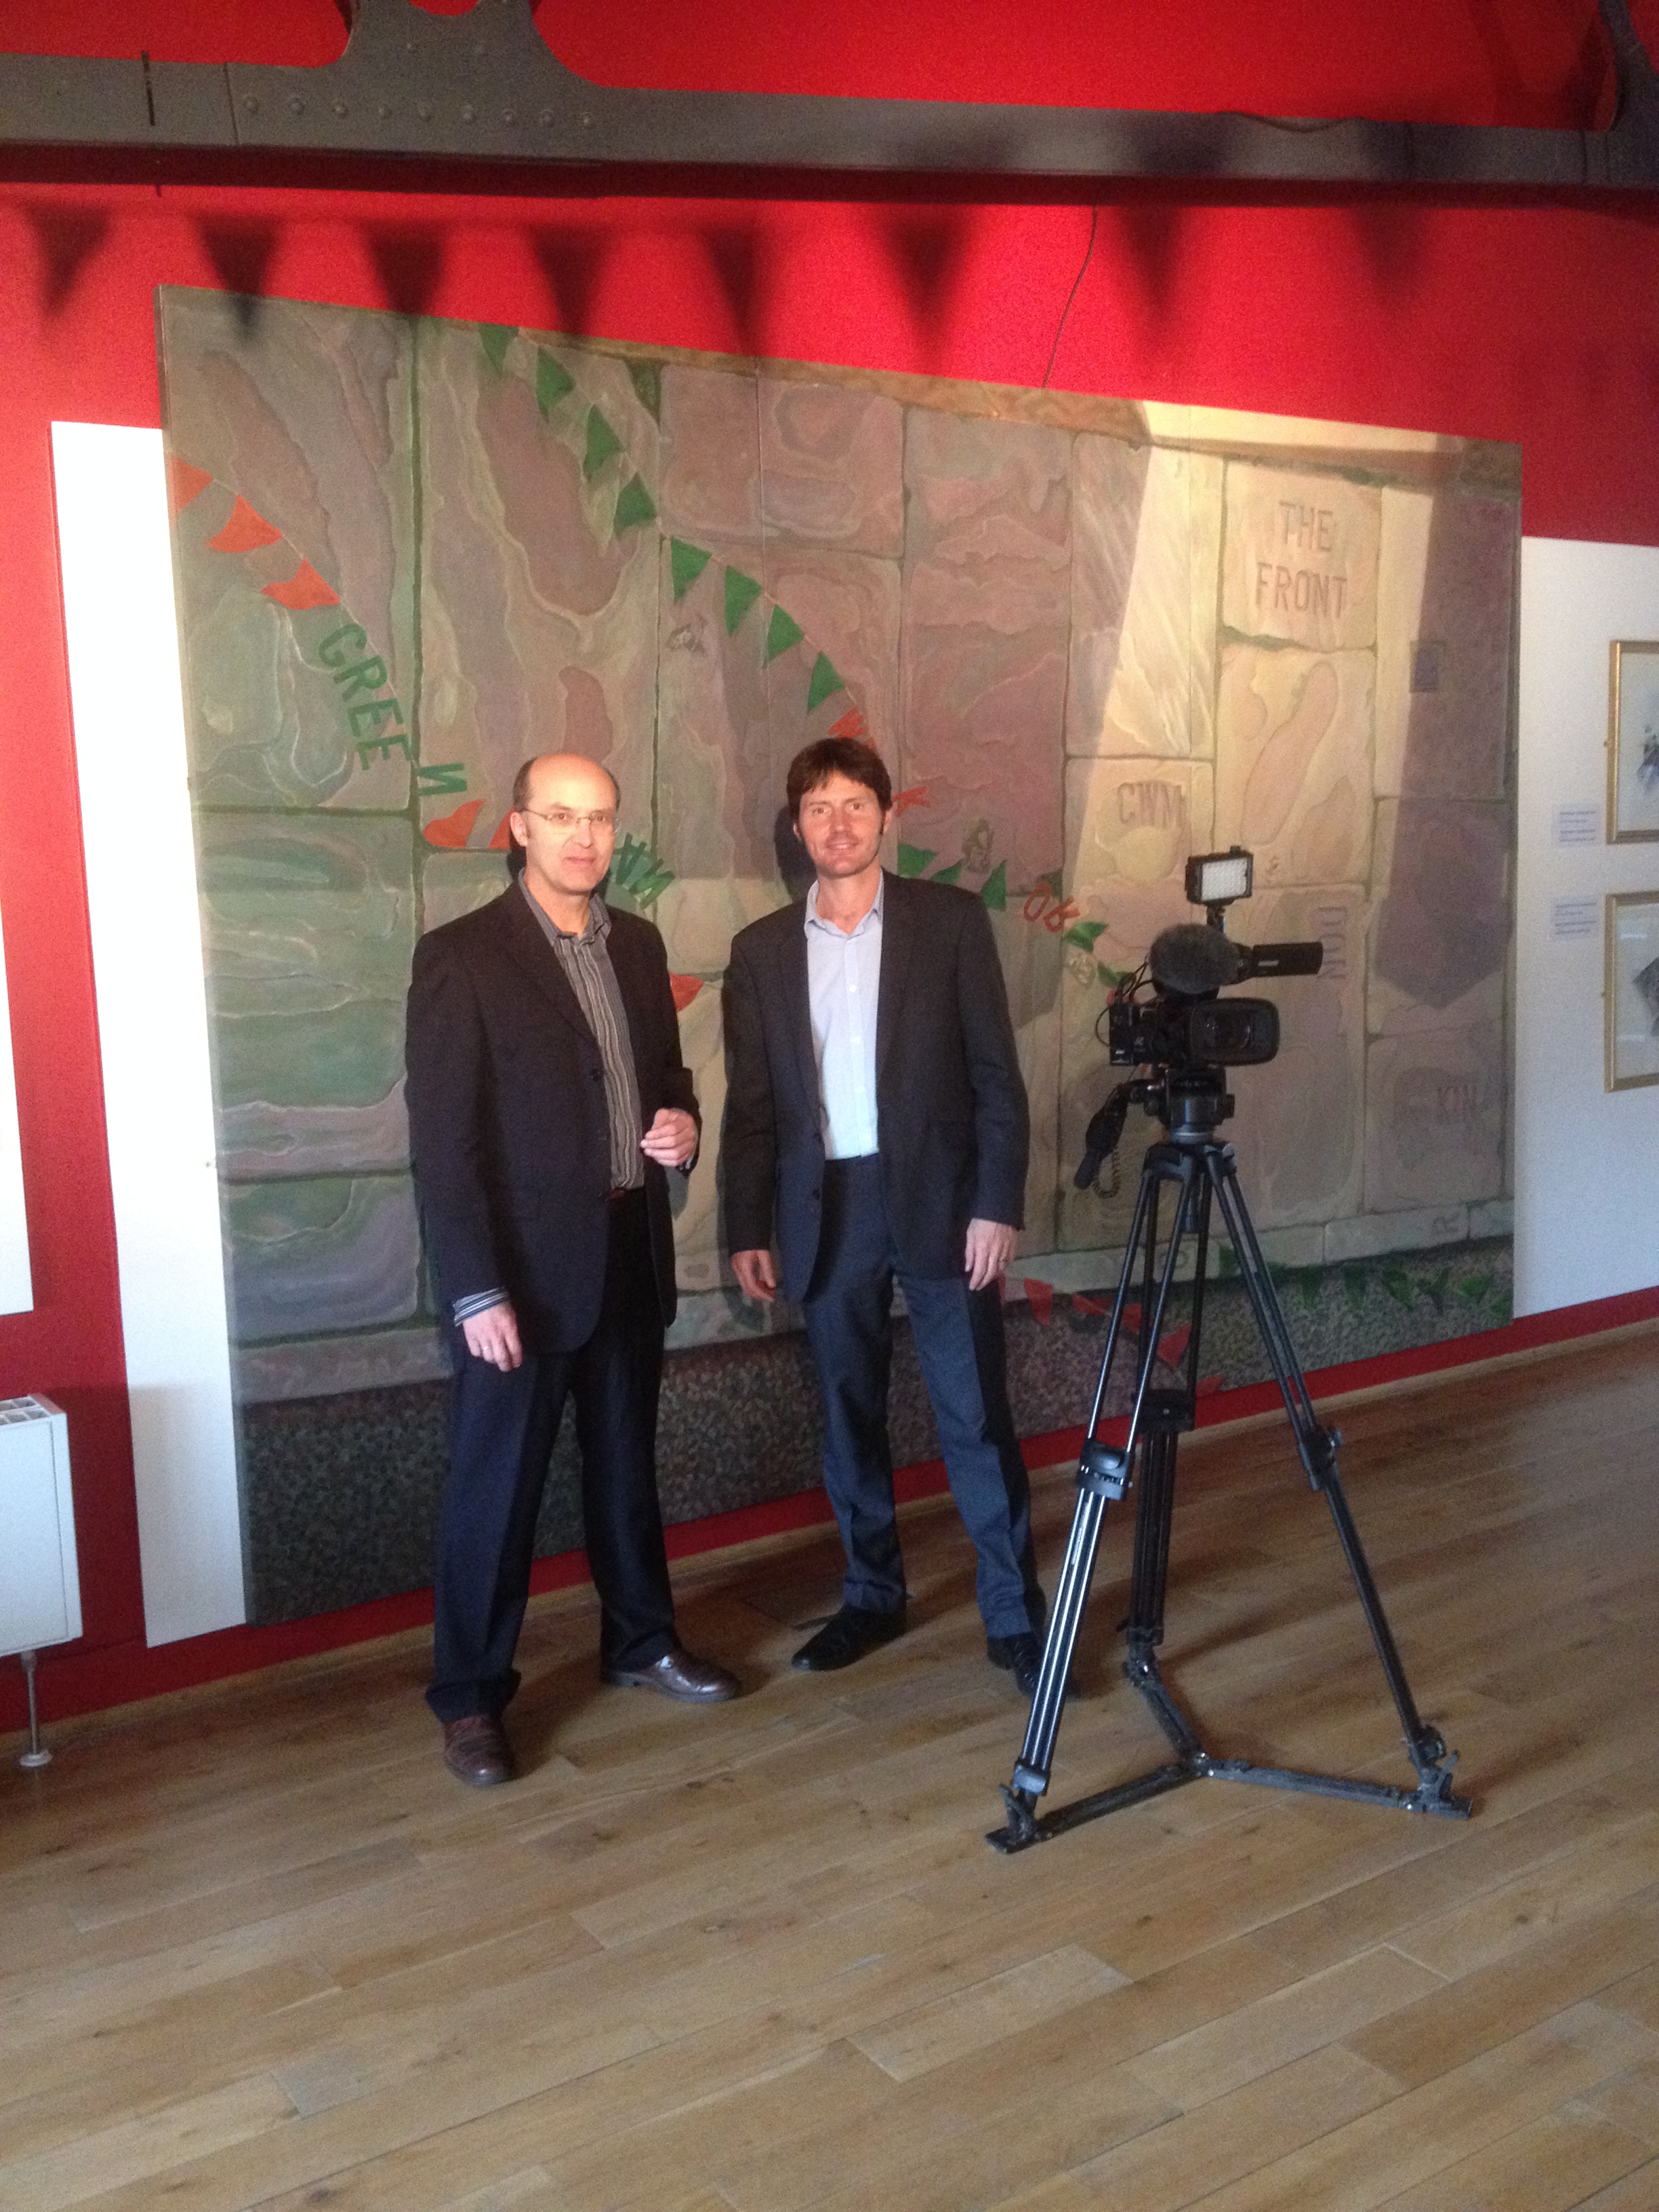 Ceri Thomas with Carwyn Jones of BBC Wales Today television at 'Placing Dylan', Swansea 2014